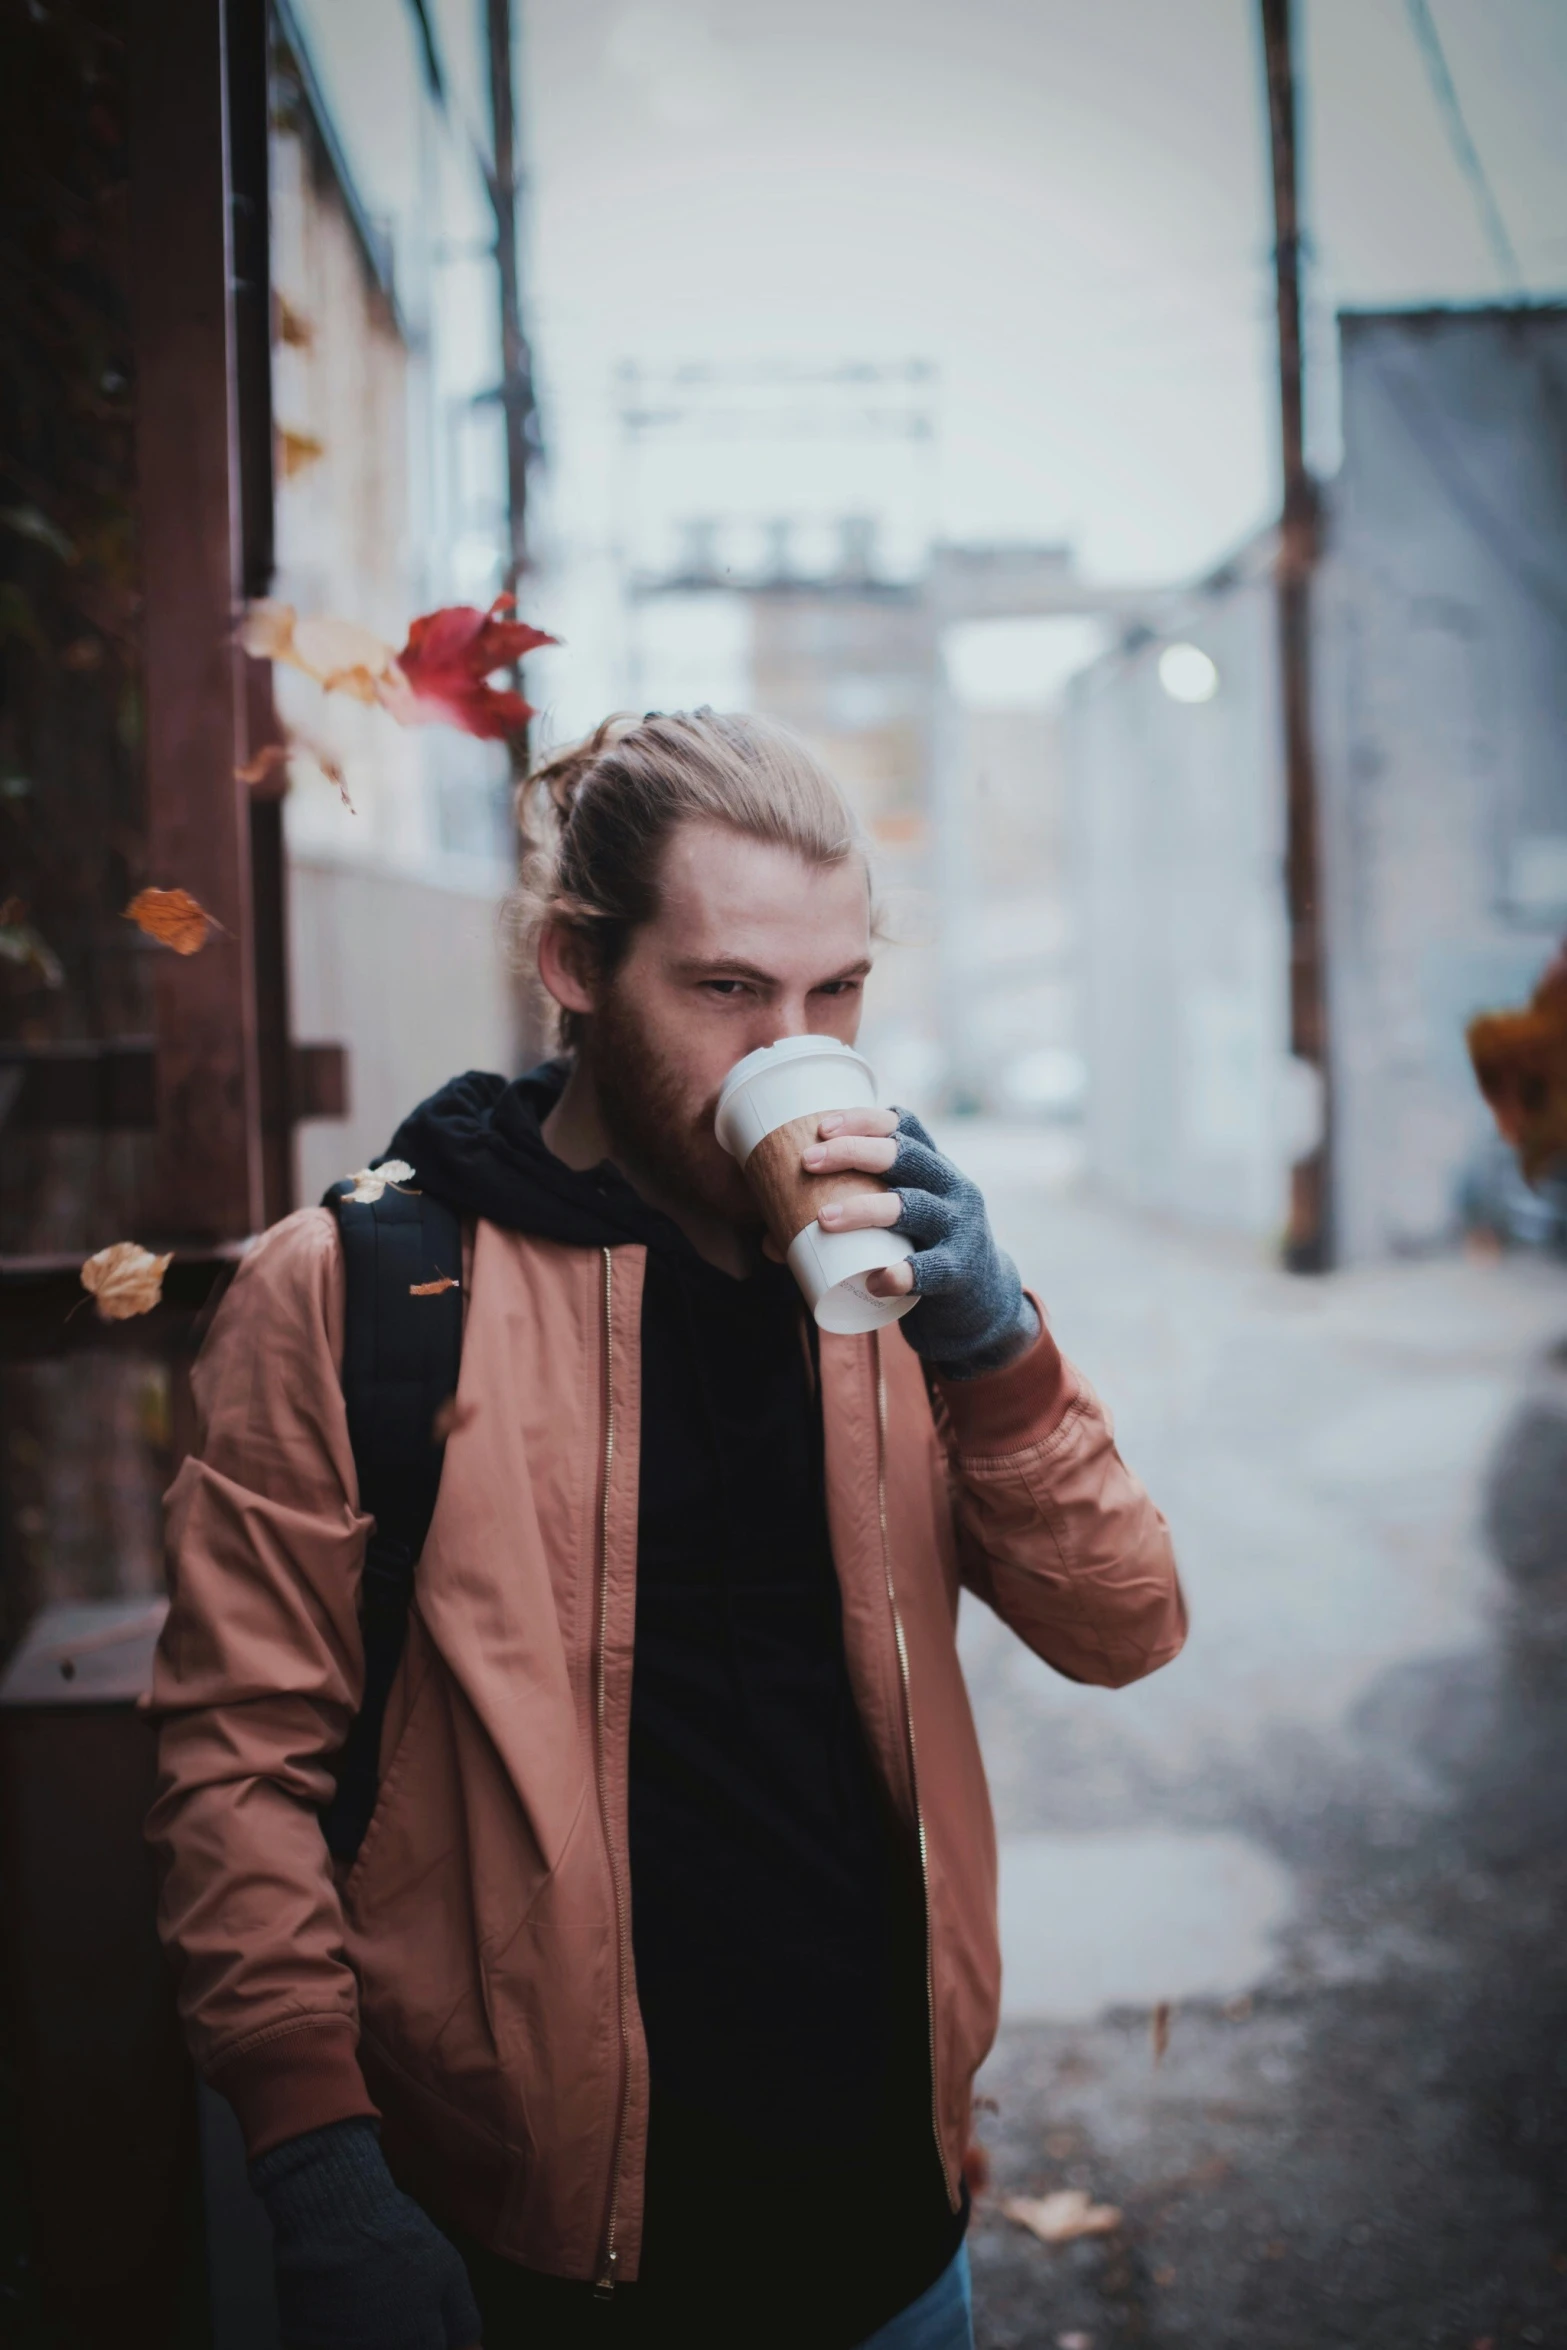 a man standing on the sidewalk sipping from a cup